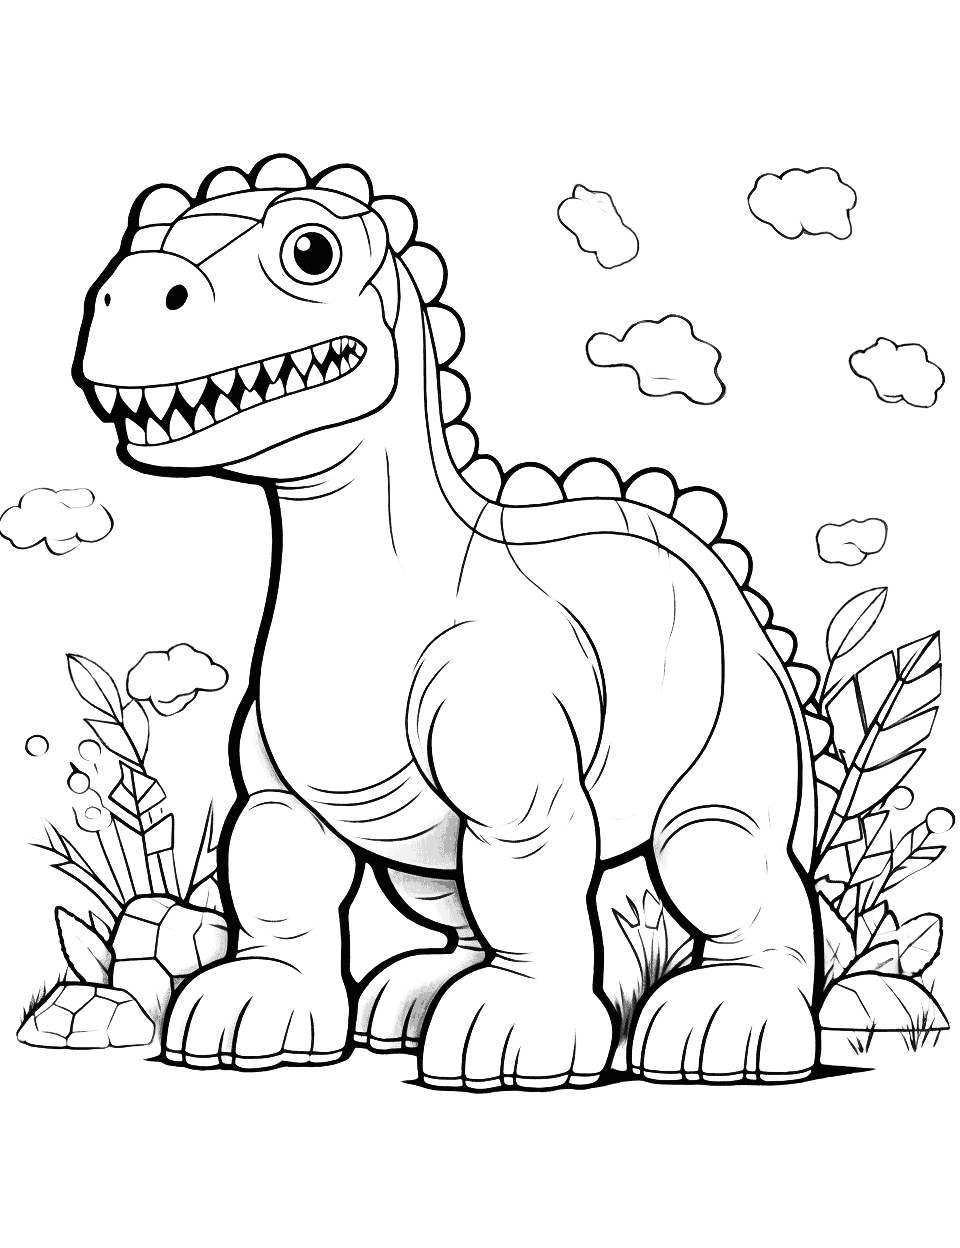 Cartoon Dinosaur Coloring Page - A coloring page featuring a cartoon-like dinosaur in the outdoors.